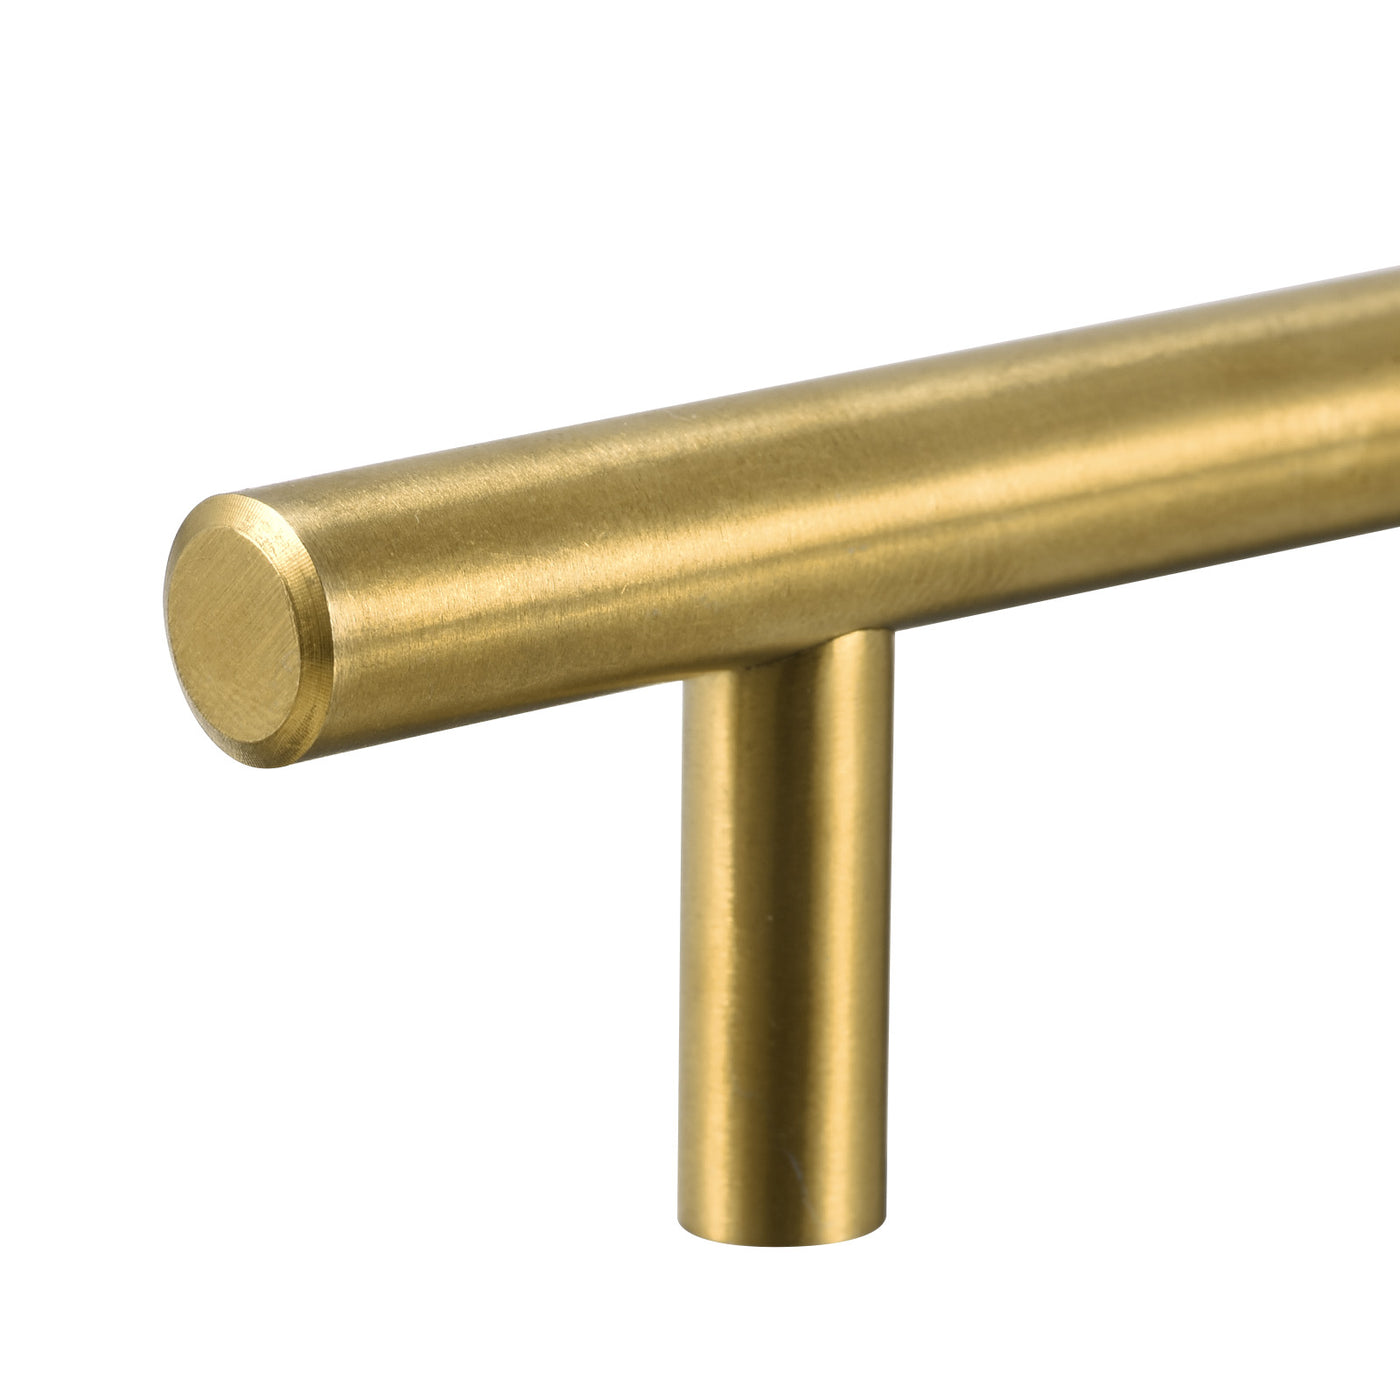 uxcell Uxcell T Bar Pull Handle, 10"(250mm) Length 10mm Dia Stainless Steel Cabinet Pulls 6.3"(160mm) Hole Center Distance Gold Tone